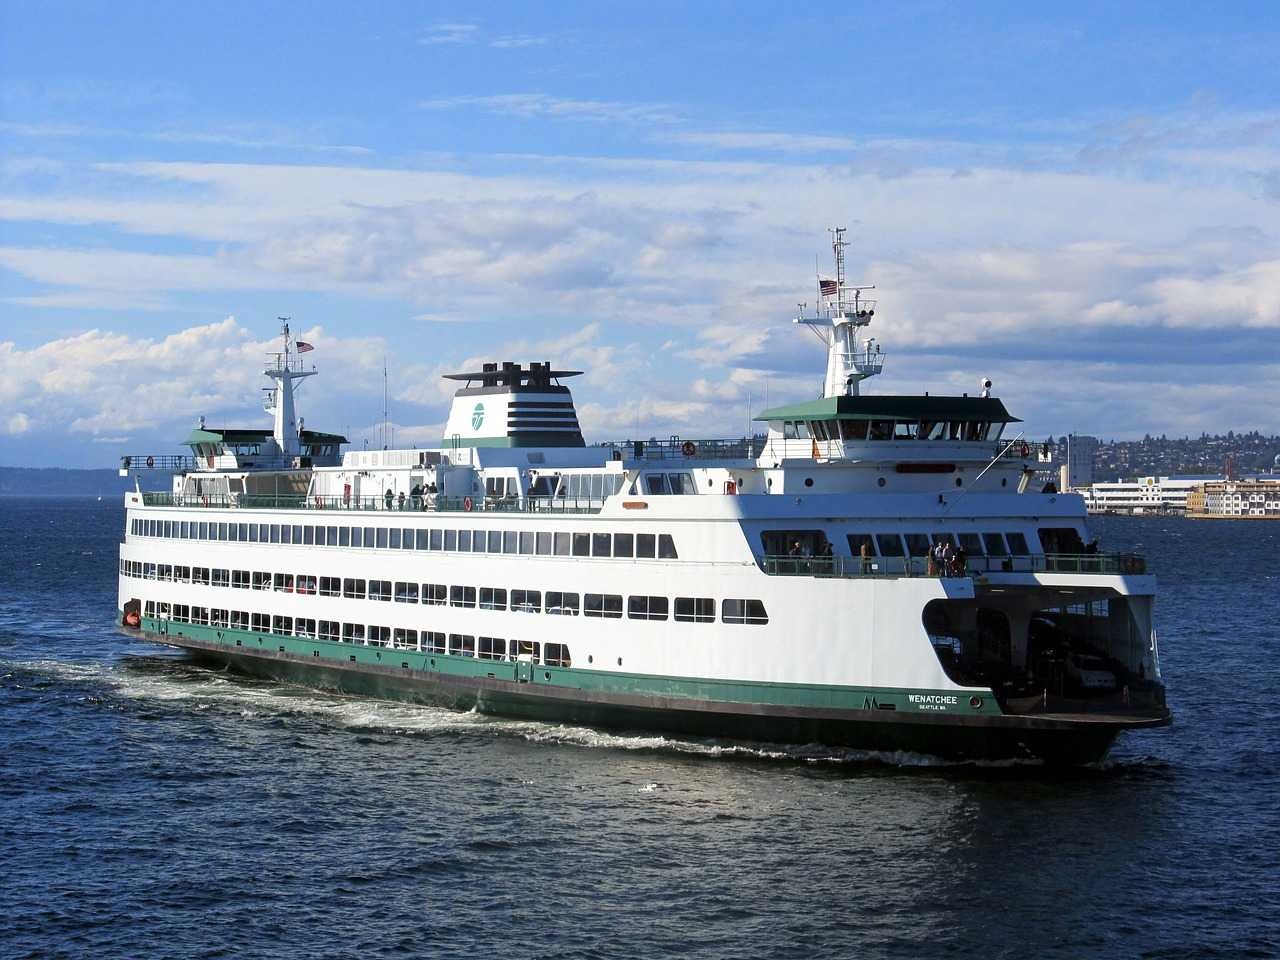 Ferry boat image classifcation dataset for machine learning